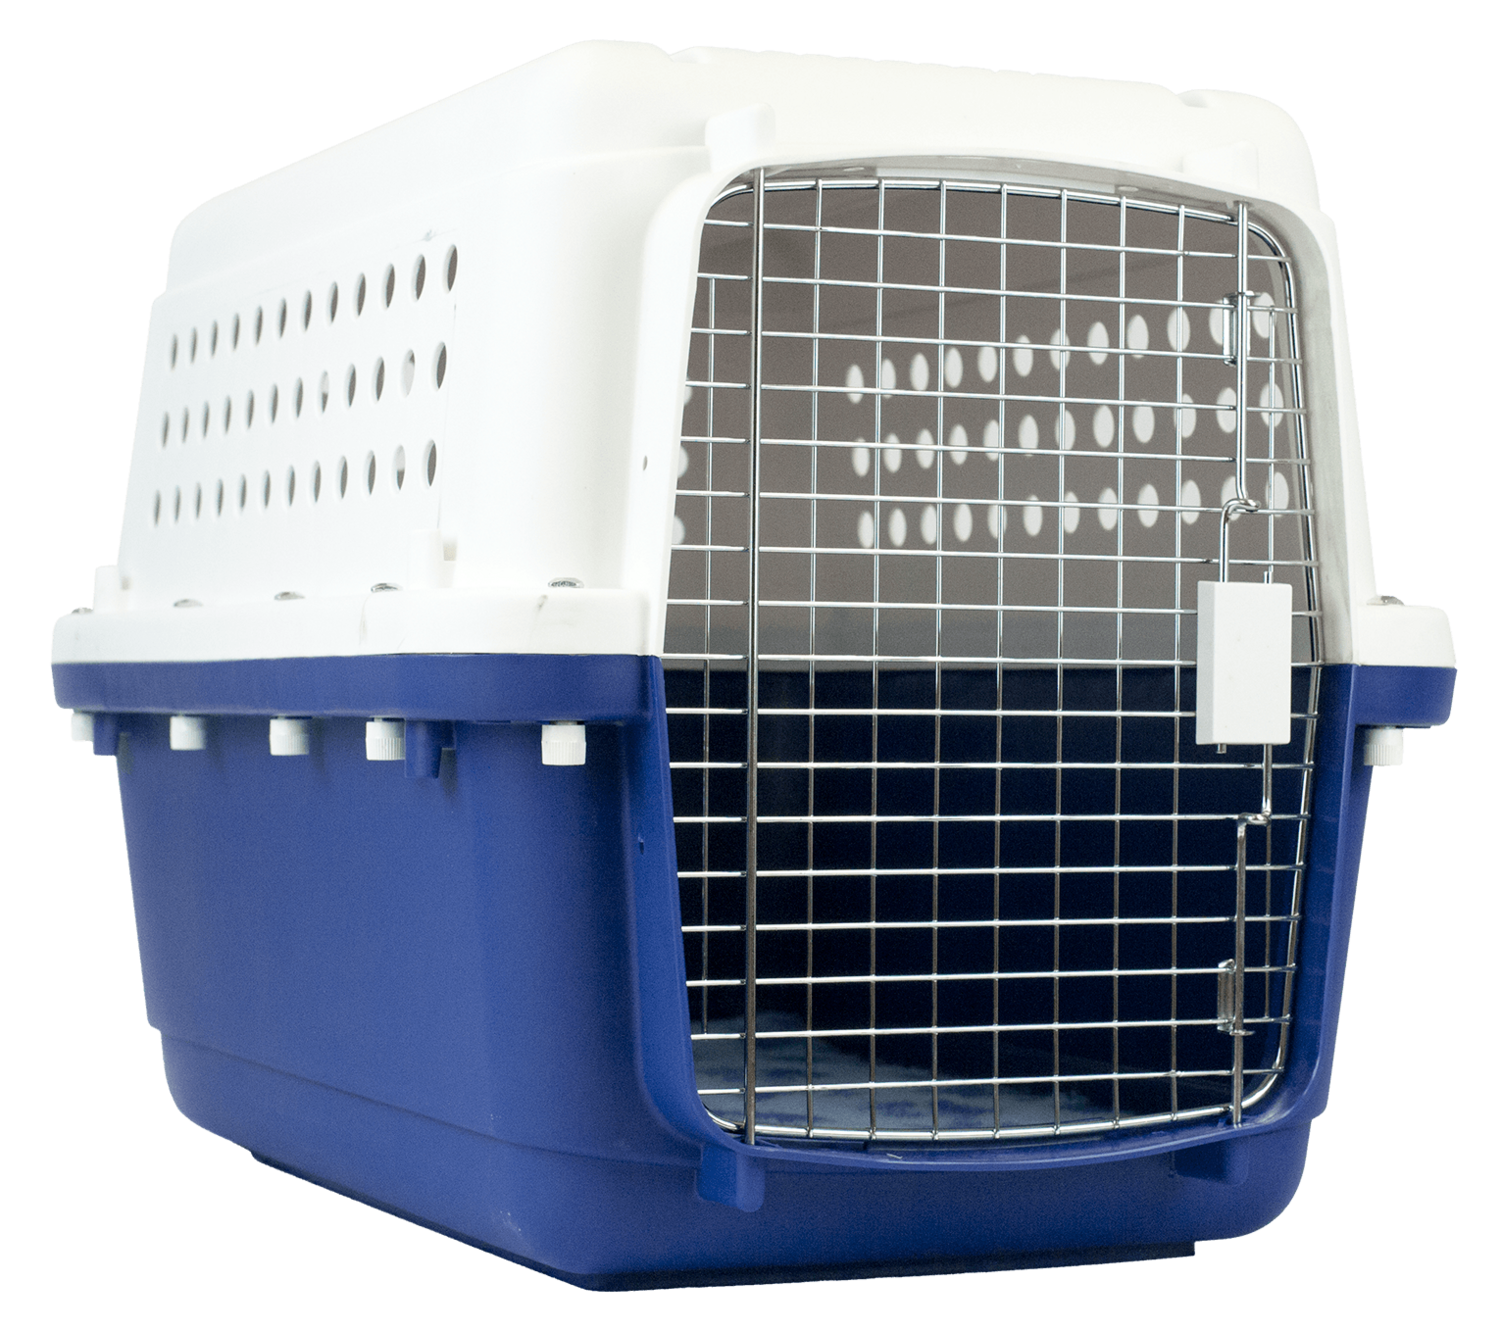 BB45 - suitable for larger cats and small/medium dogs